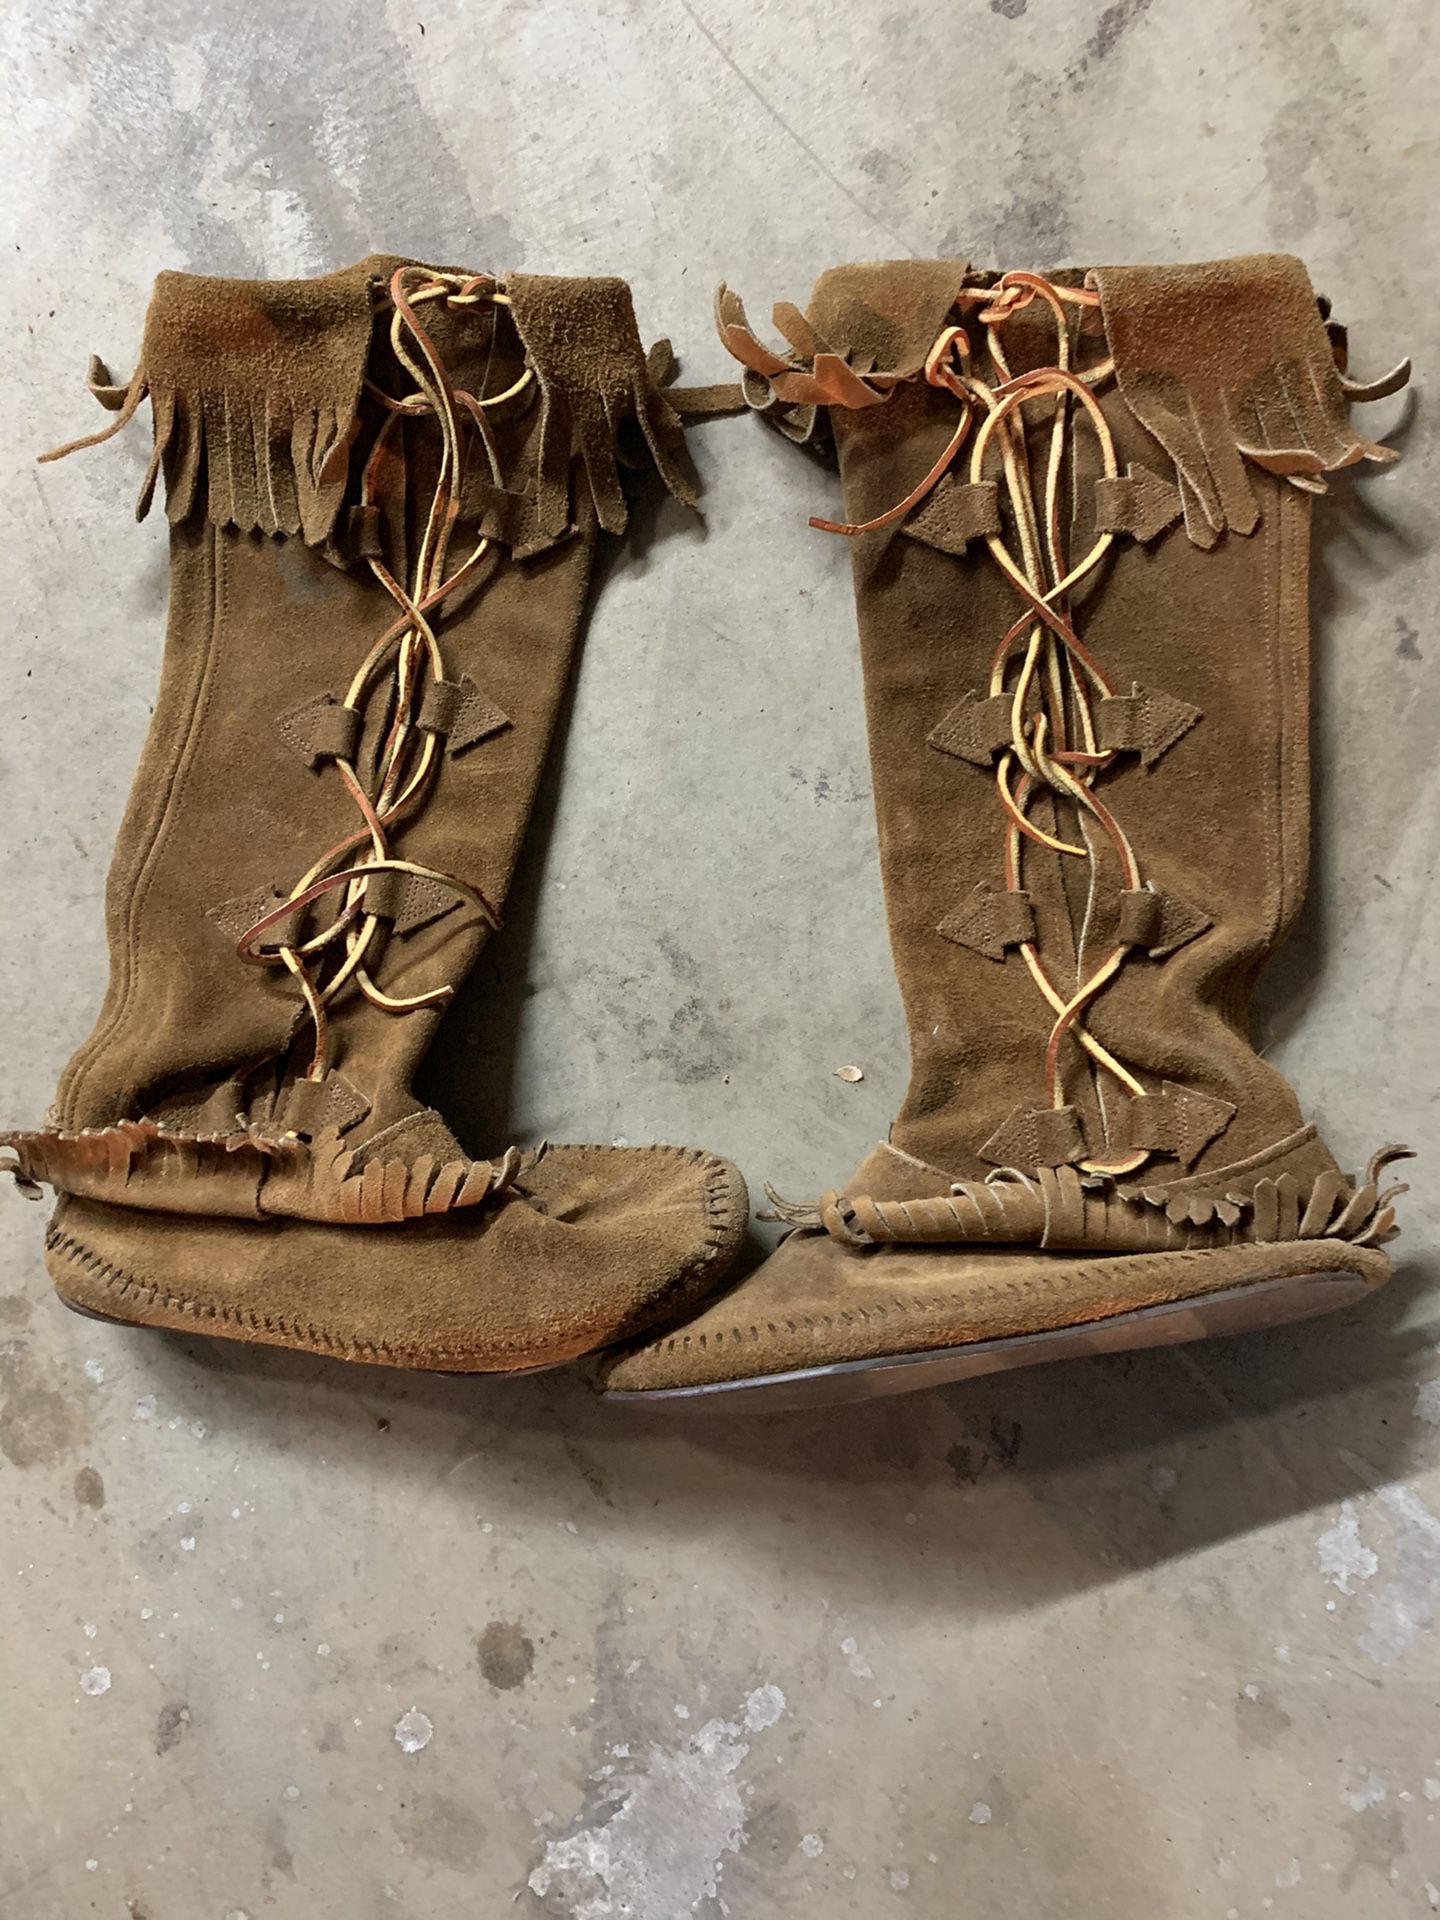 Authentic Indian Moccosins from New Mexico or Arizona In the late 70s From roadside reservation